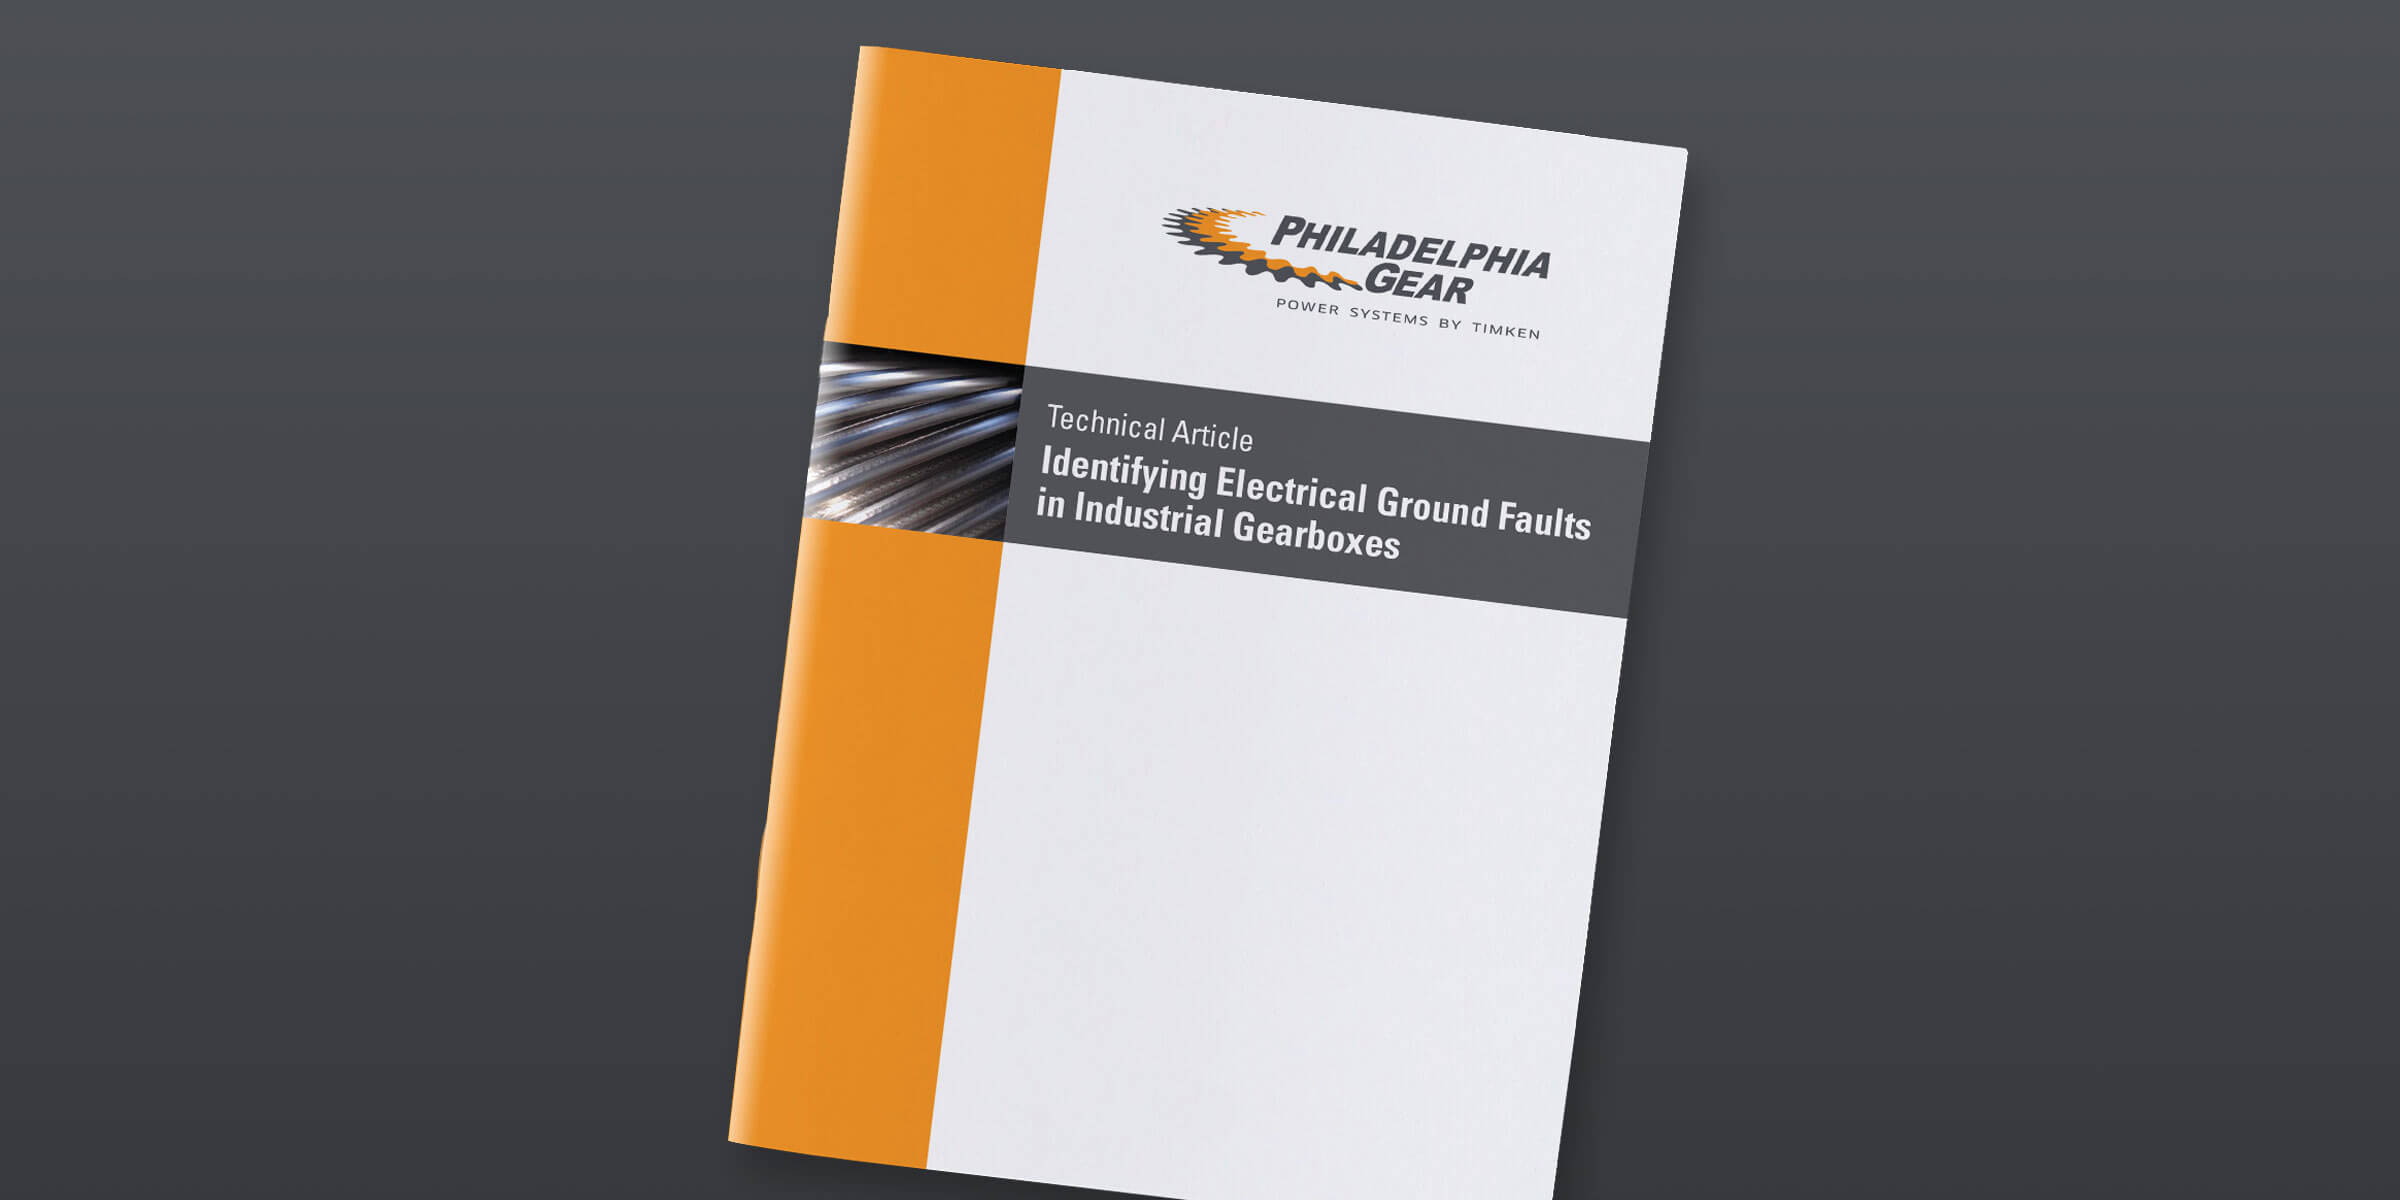 Brochure for identifying electrical ground faults in industrial gearboxes by Philadelphia Gear